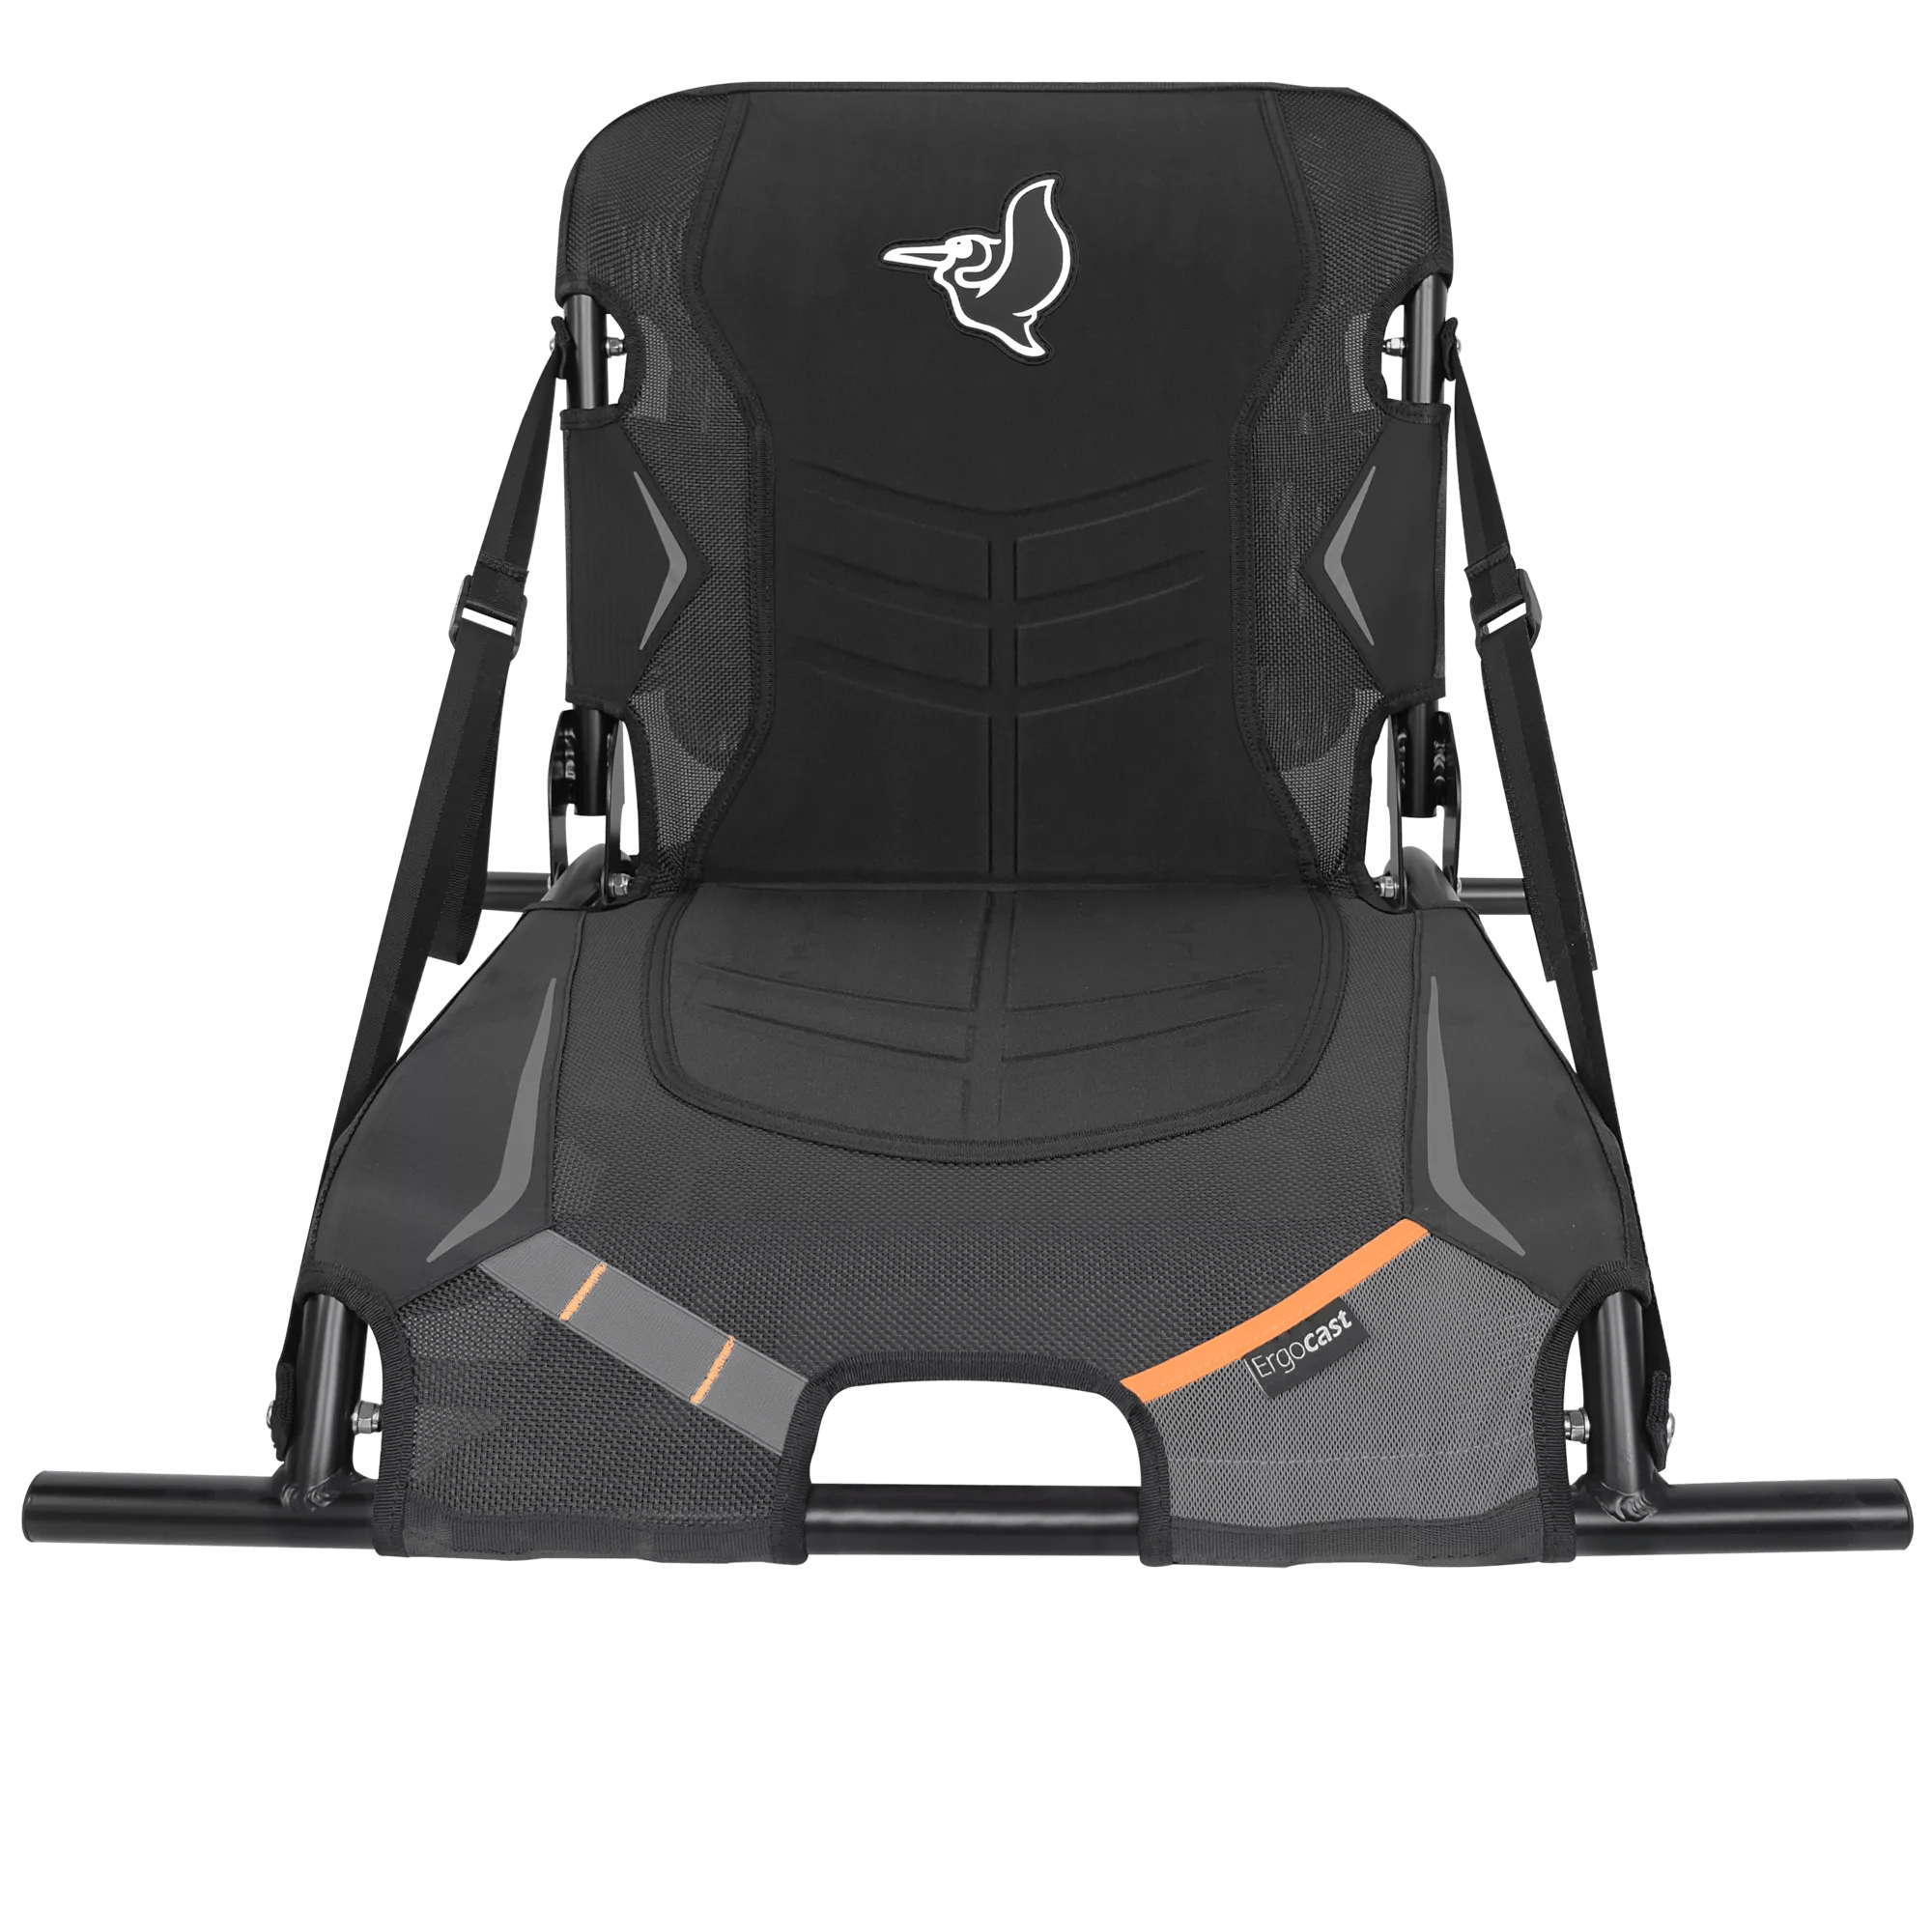 PELICAN - Ergocast G2 Seating System™ -  - PS1733 - TOP